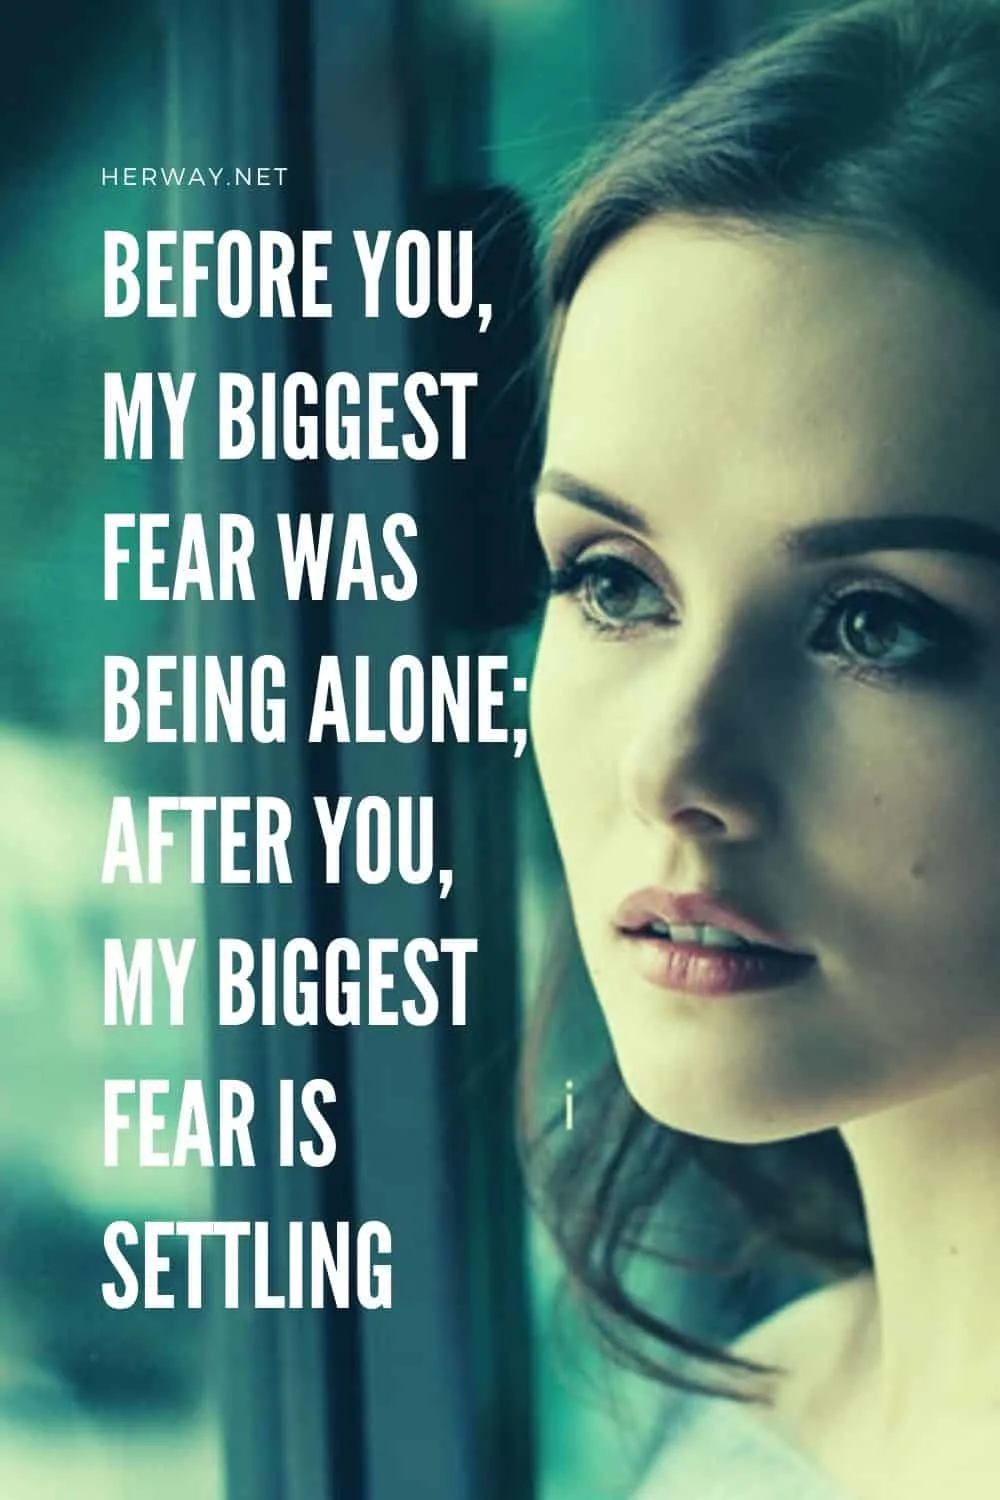 Before You, My Biggest Fear Was Being Alone; After You, My Biggest Fear Is Settling